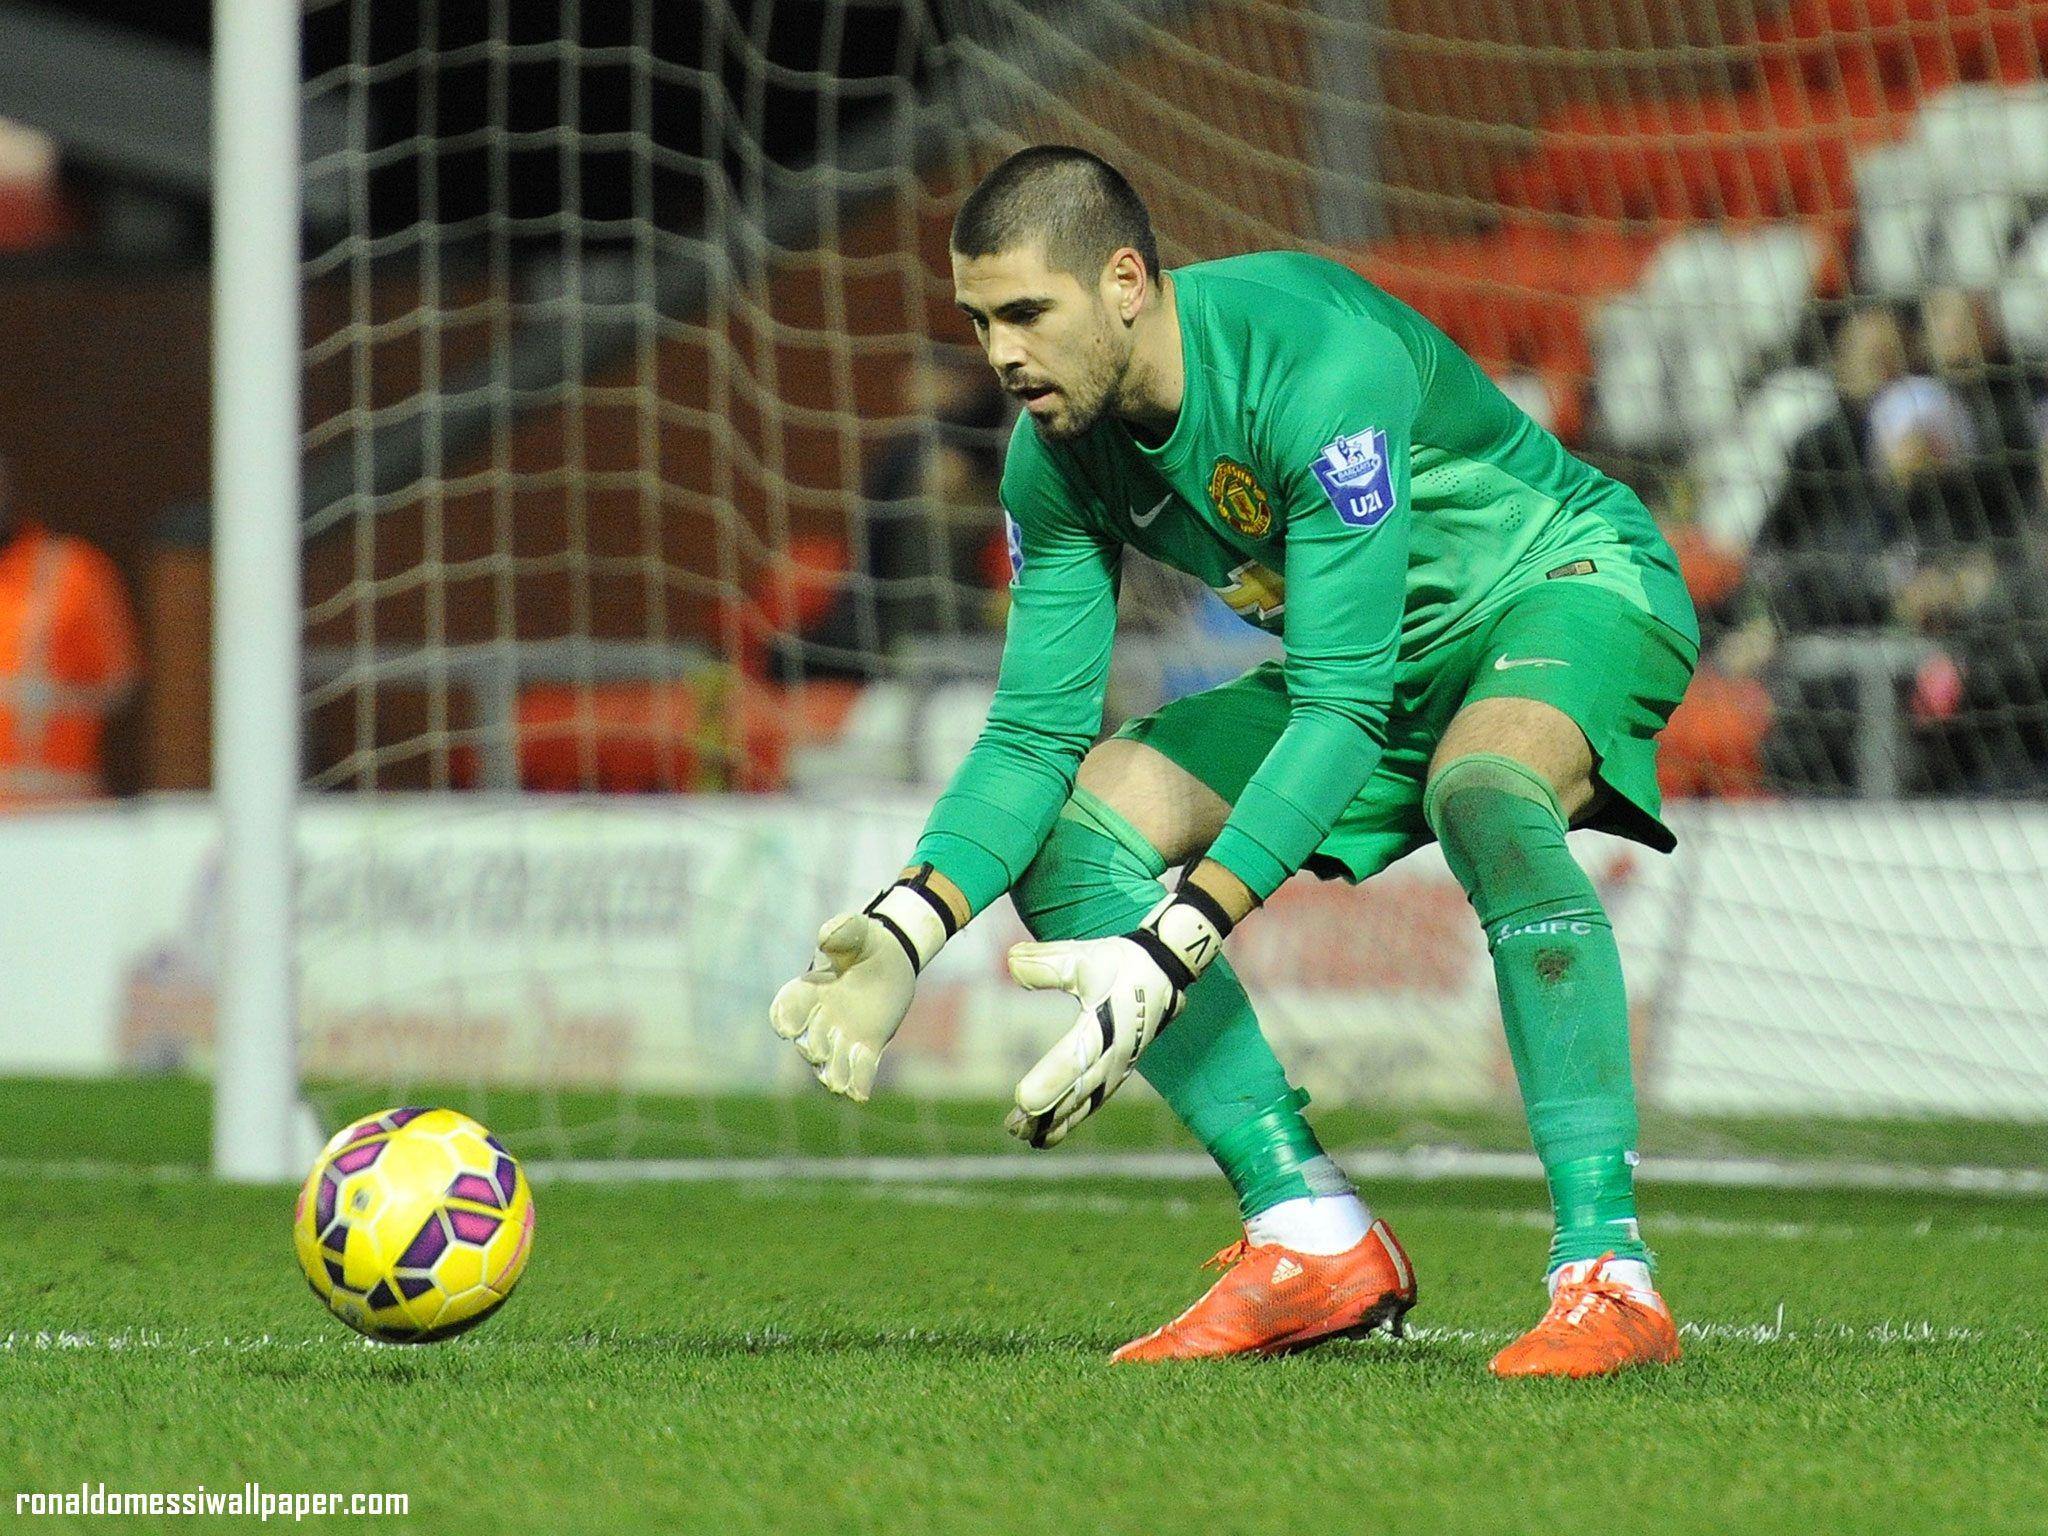 Victor Valdes Plays His First Match for Manchester United Under